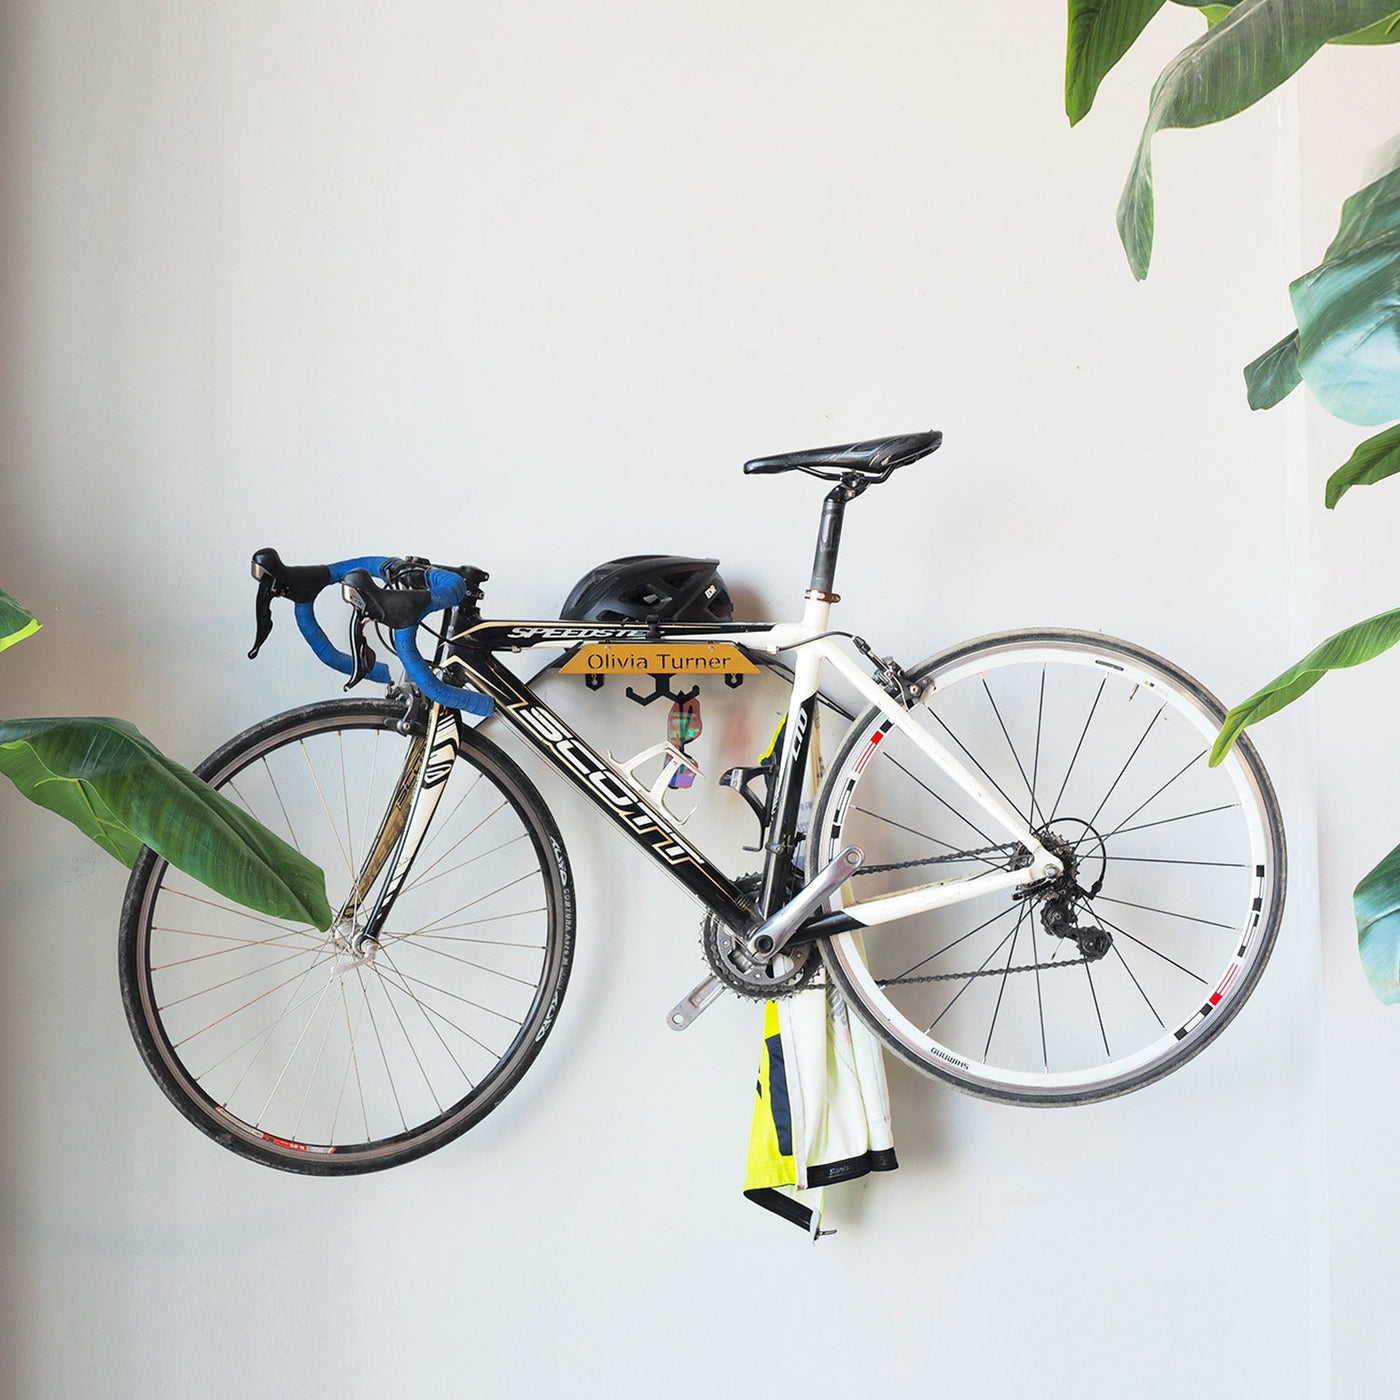 Personalized Metal Bicycle Wall Hanger - APH201